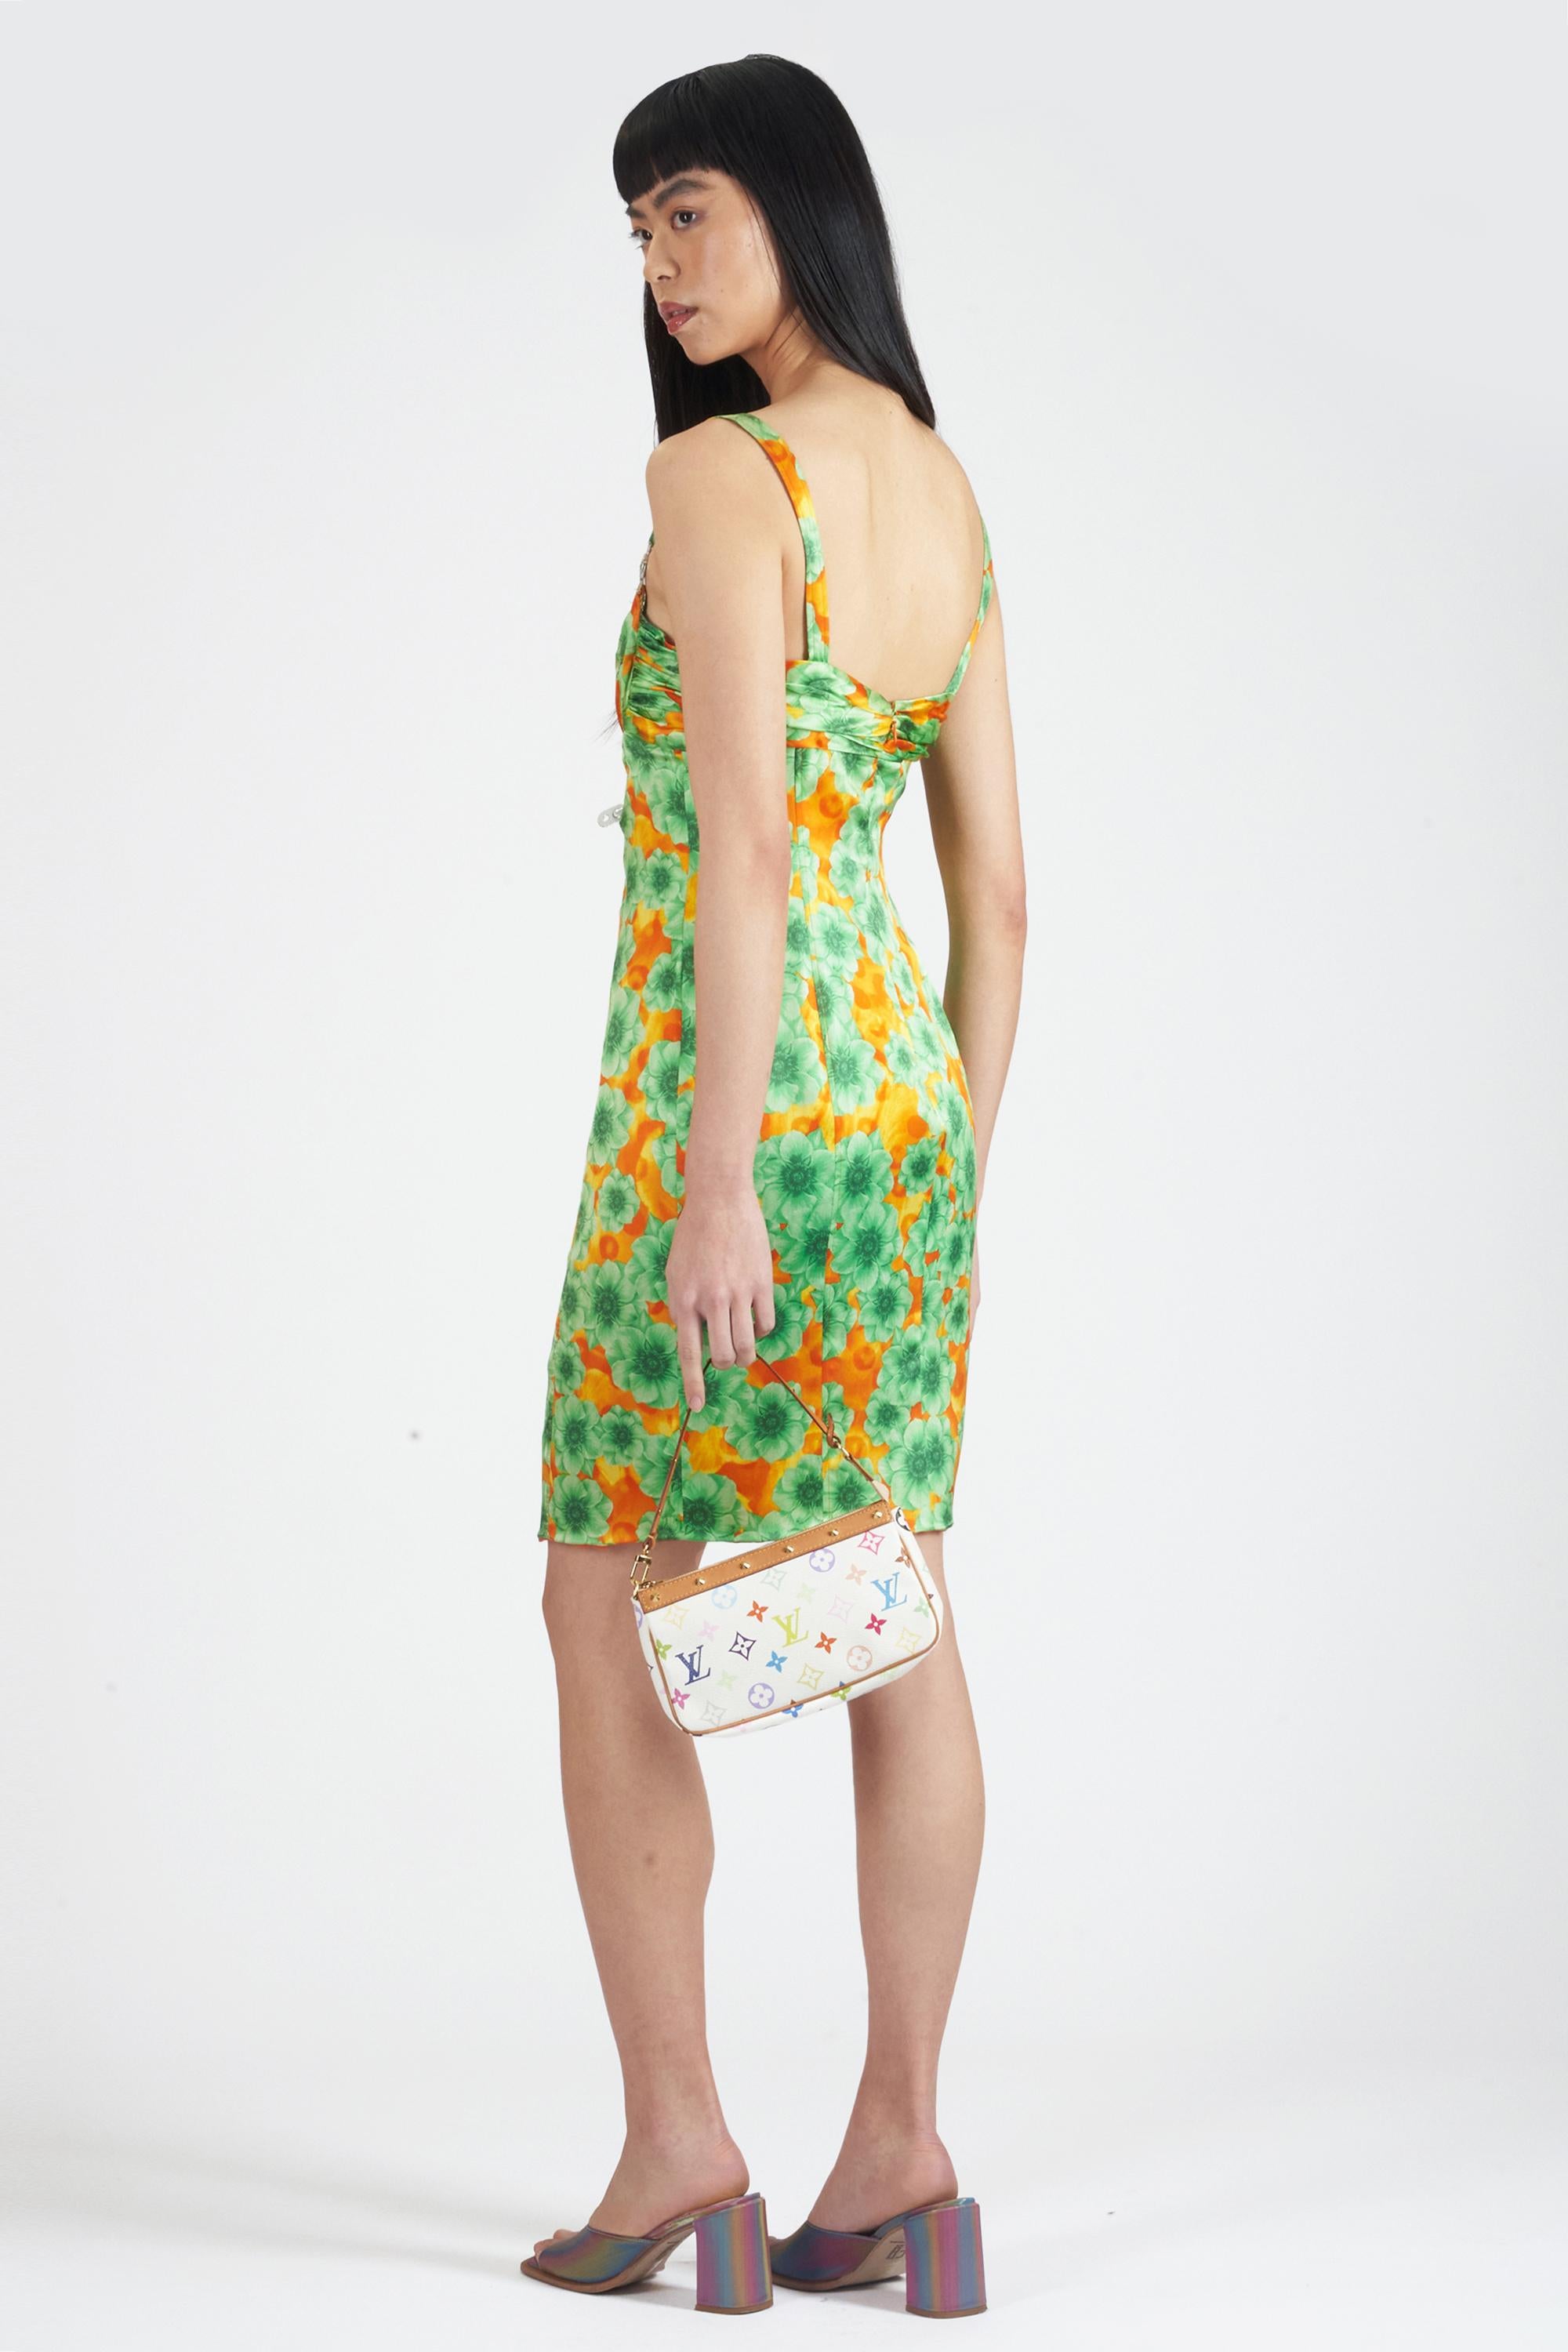 Versace Vintage S/S 1990s Floral Dress In Excellent Condition For Sale In London, GB